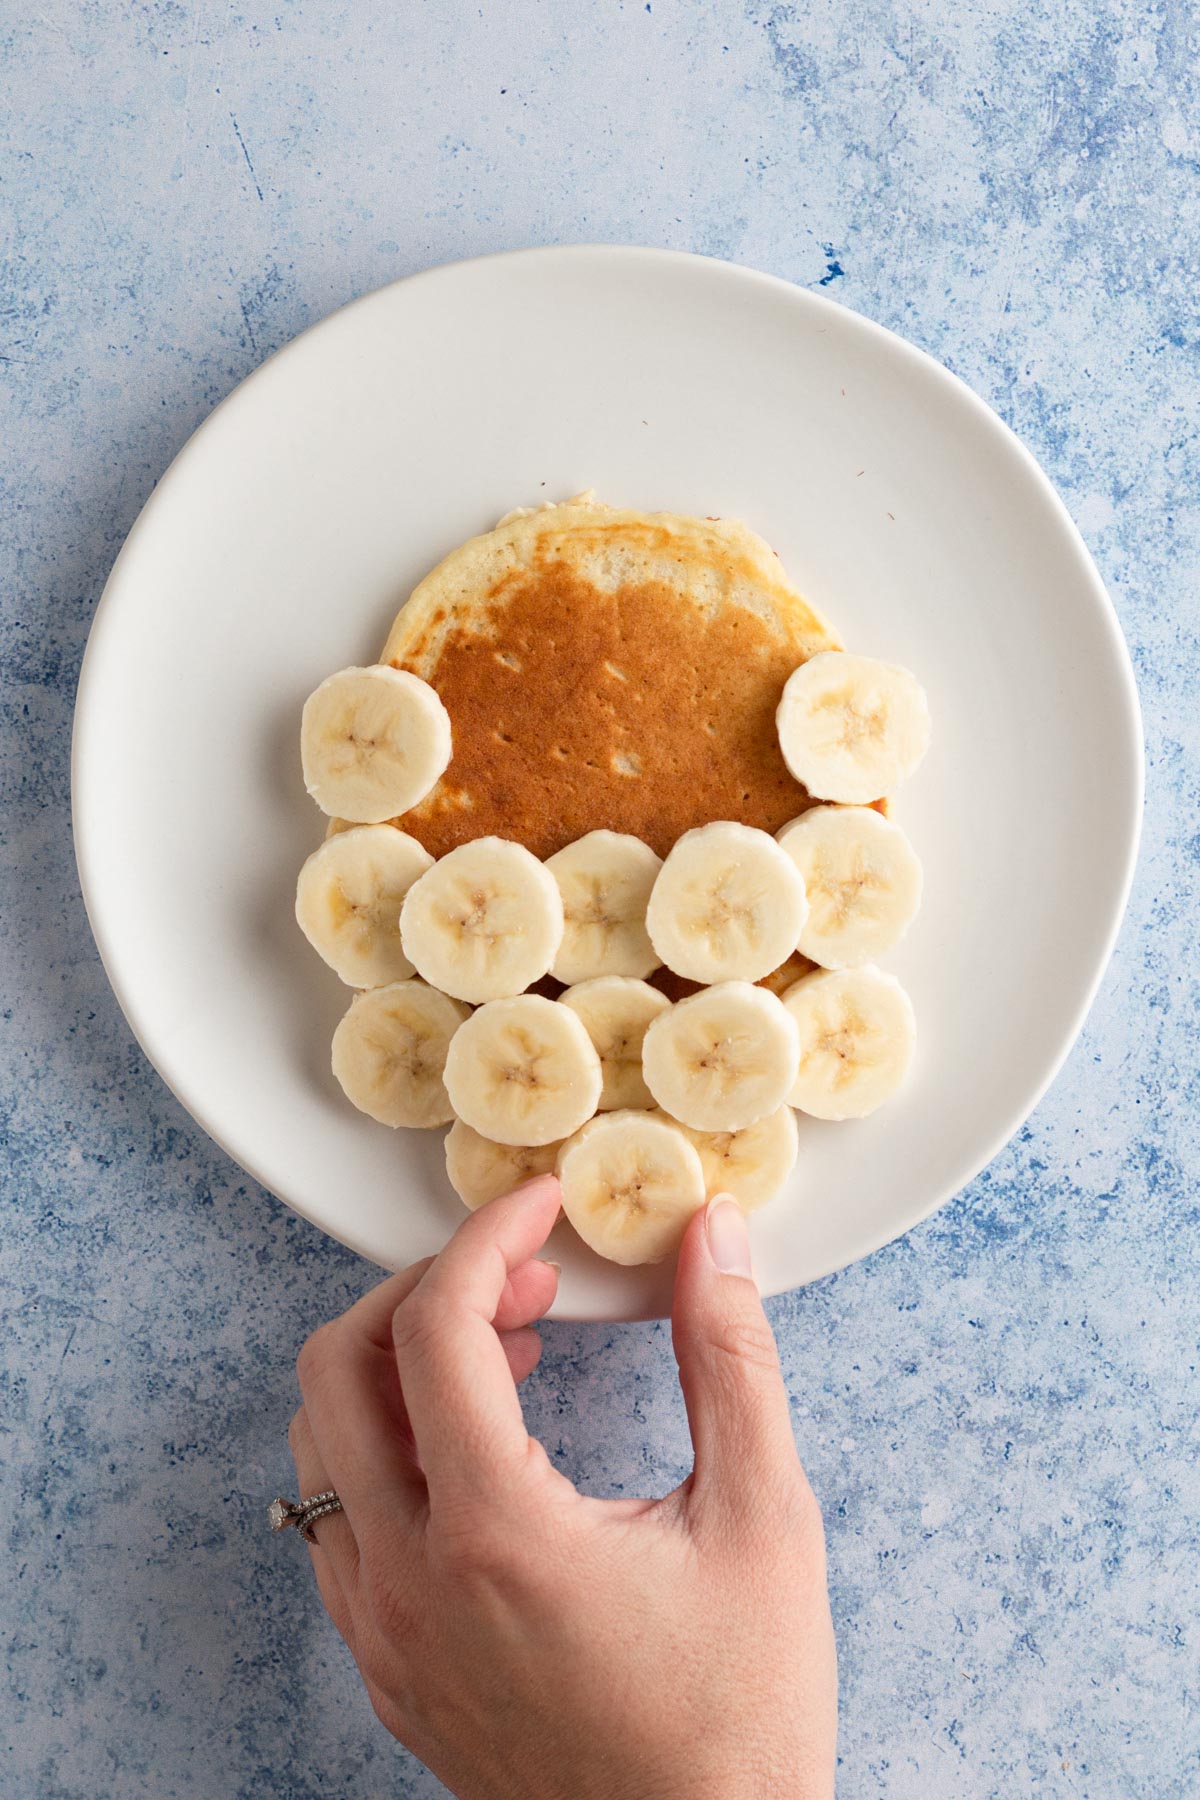 Hand placing slices of banana in a triangle shape below the pancake.